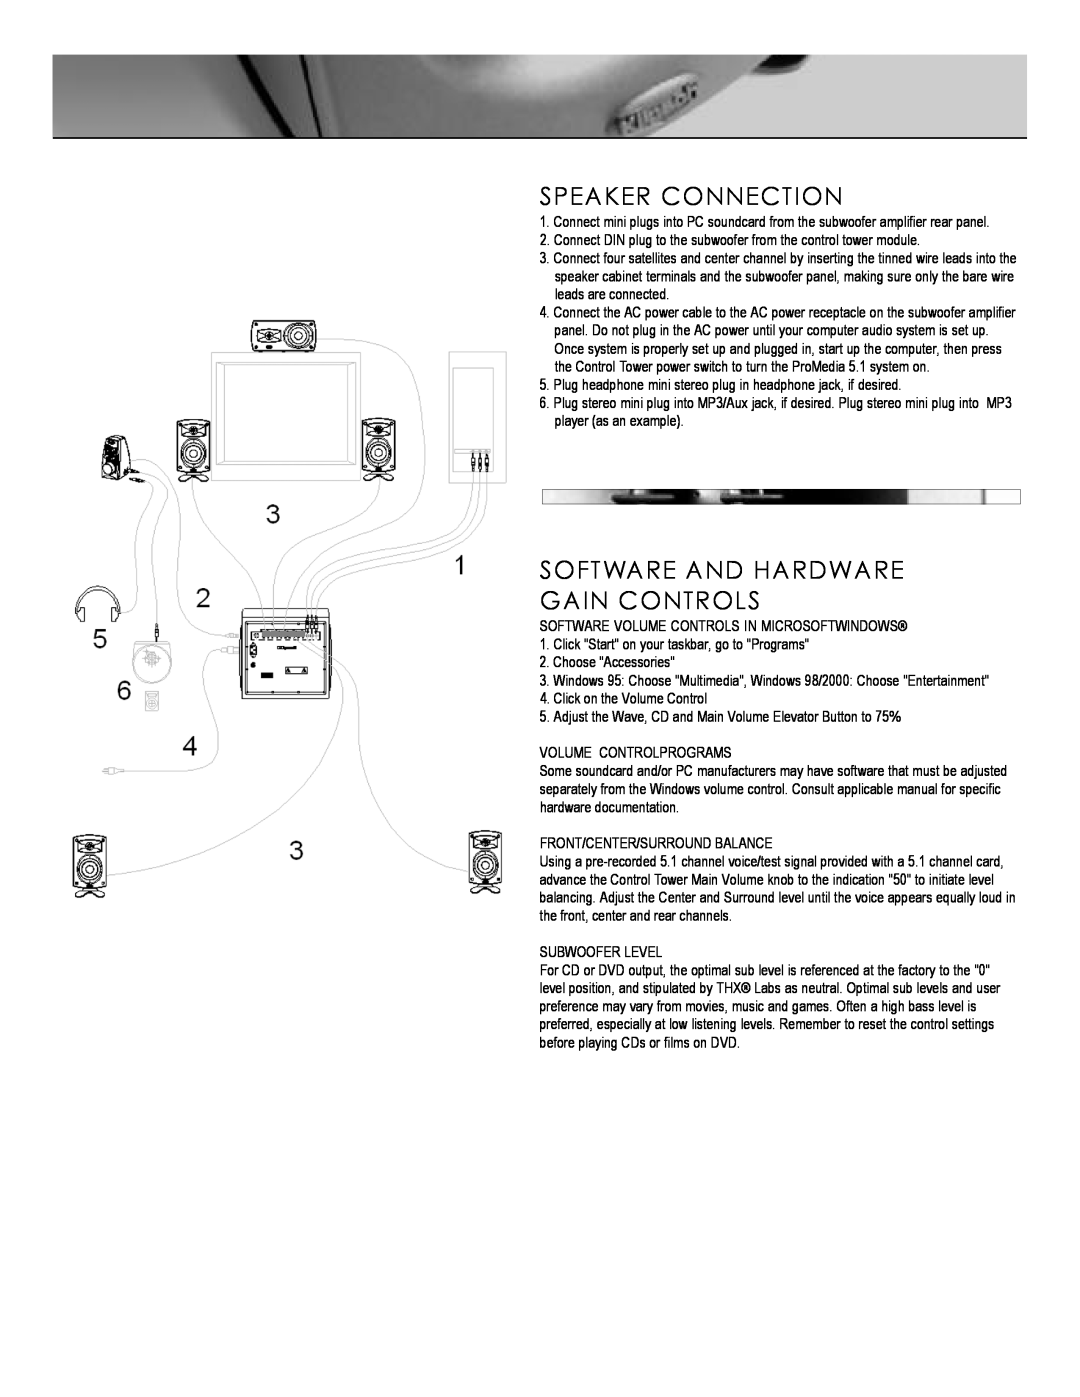 Kitchen Labs ProMediaTM manual Speaker Connection, Software And Hardware Gain Controls 